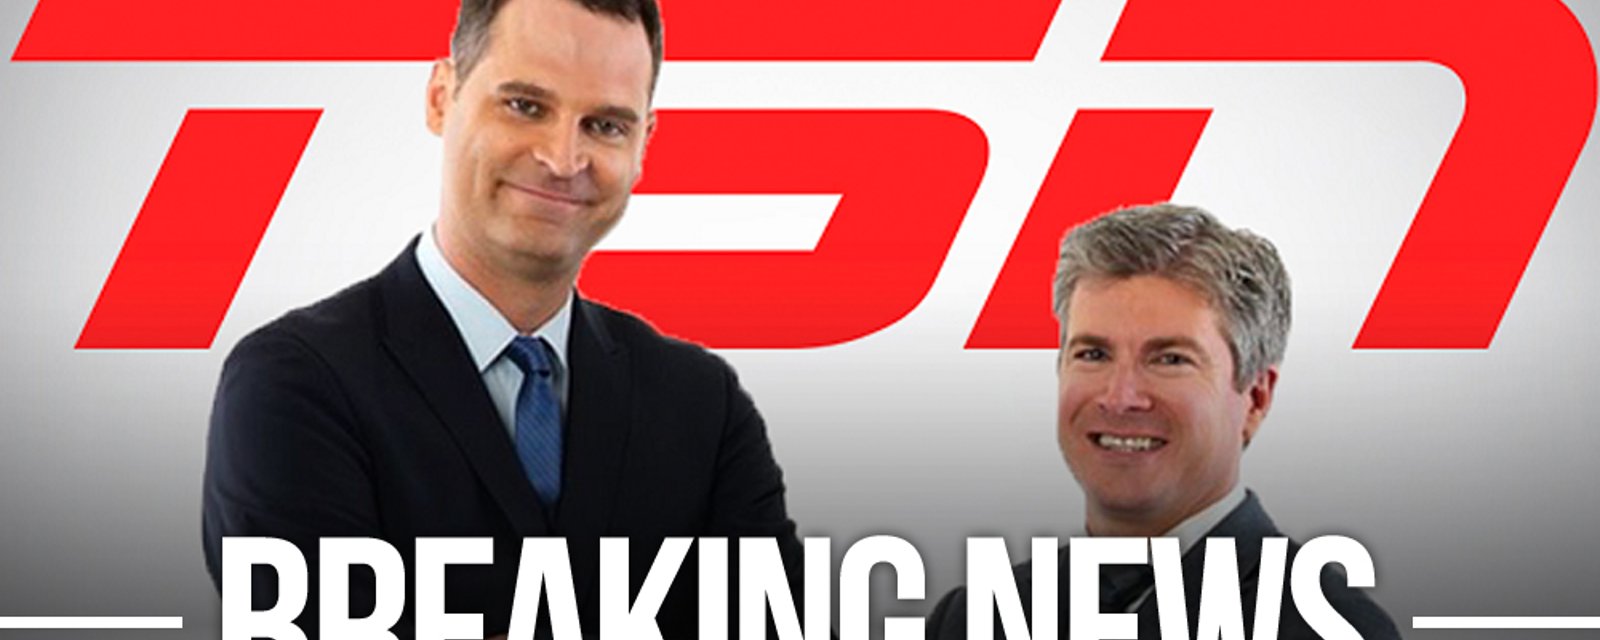 TSN's Jay and Dan are done, lay off appears to blindside Dan O'Toole